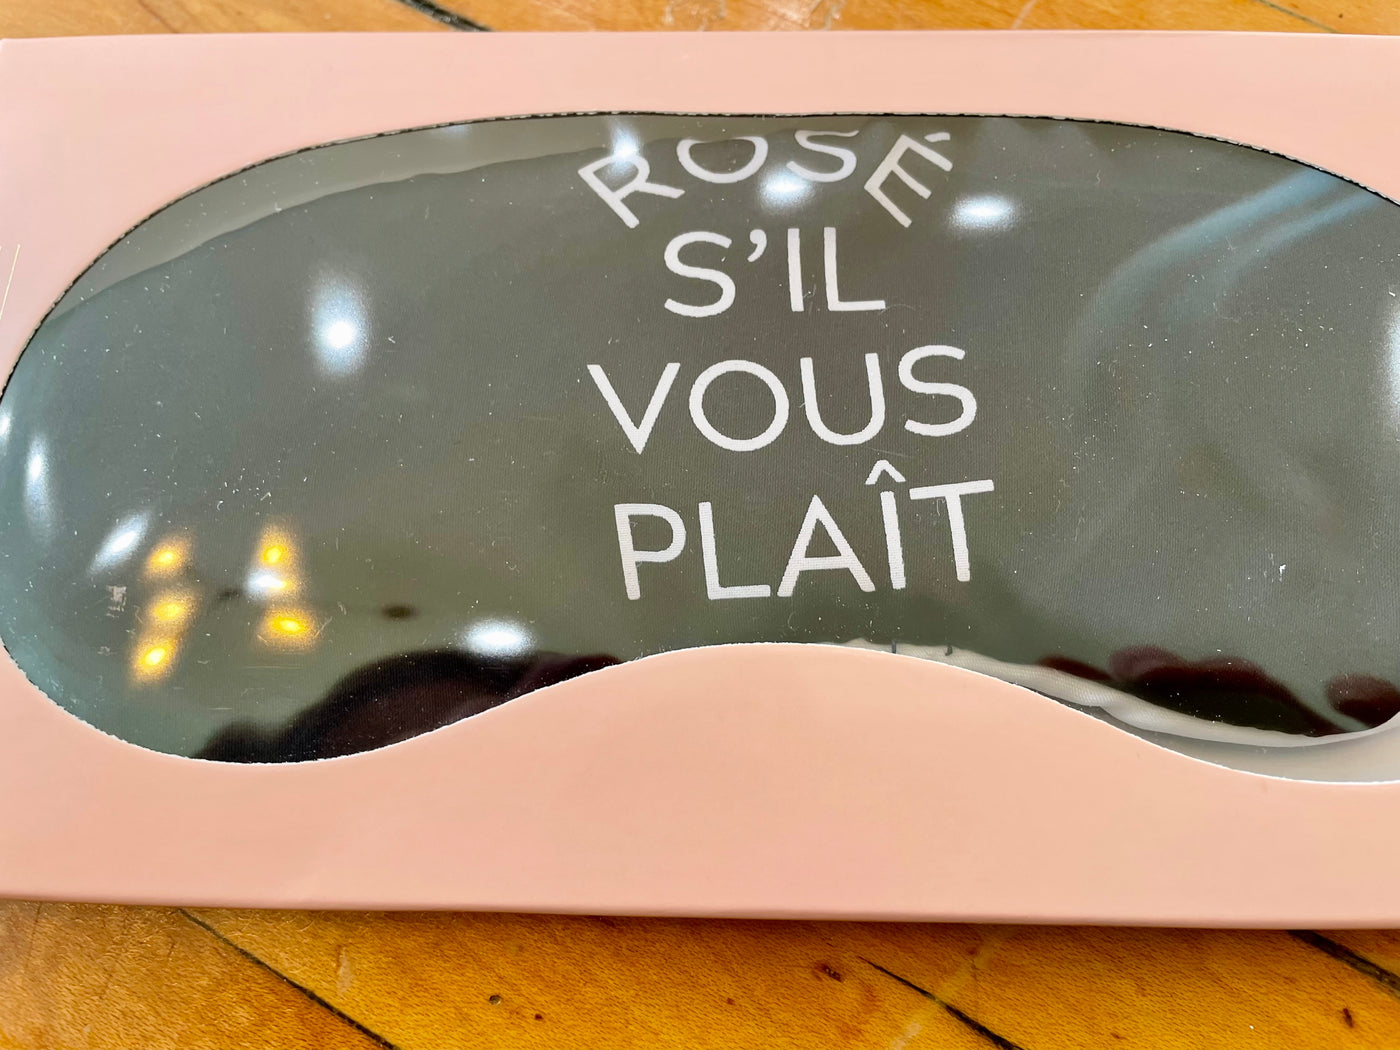 Eye masks to help you relax and block out light. Stain eye masks that say different things: -Rosé Si'l Vous Plait in black  -Airplane Mode in robins egg blue  -Breakfast at Tiffany's Eyelashes in blush pink